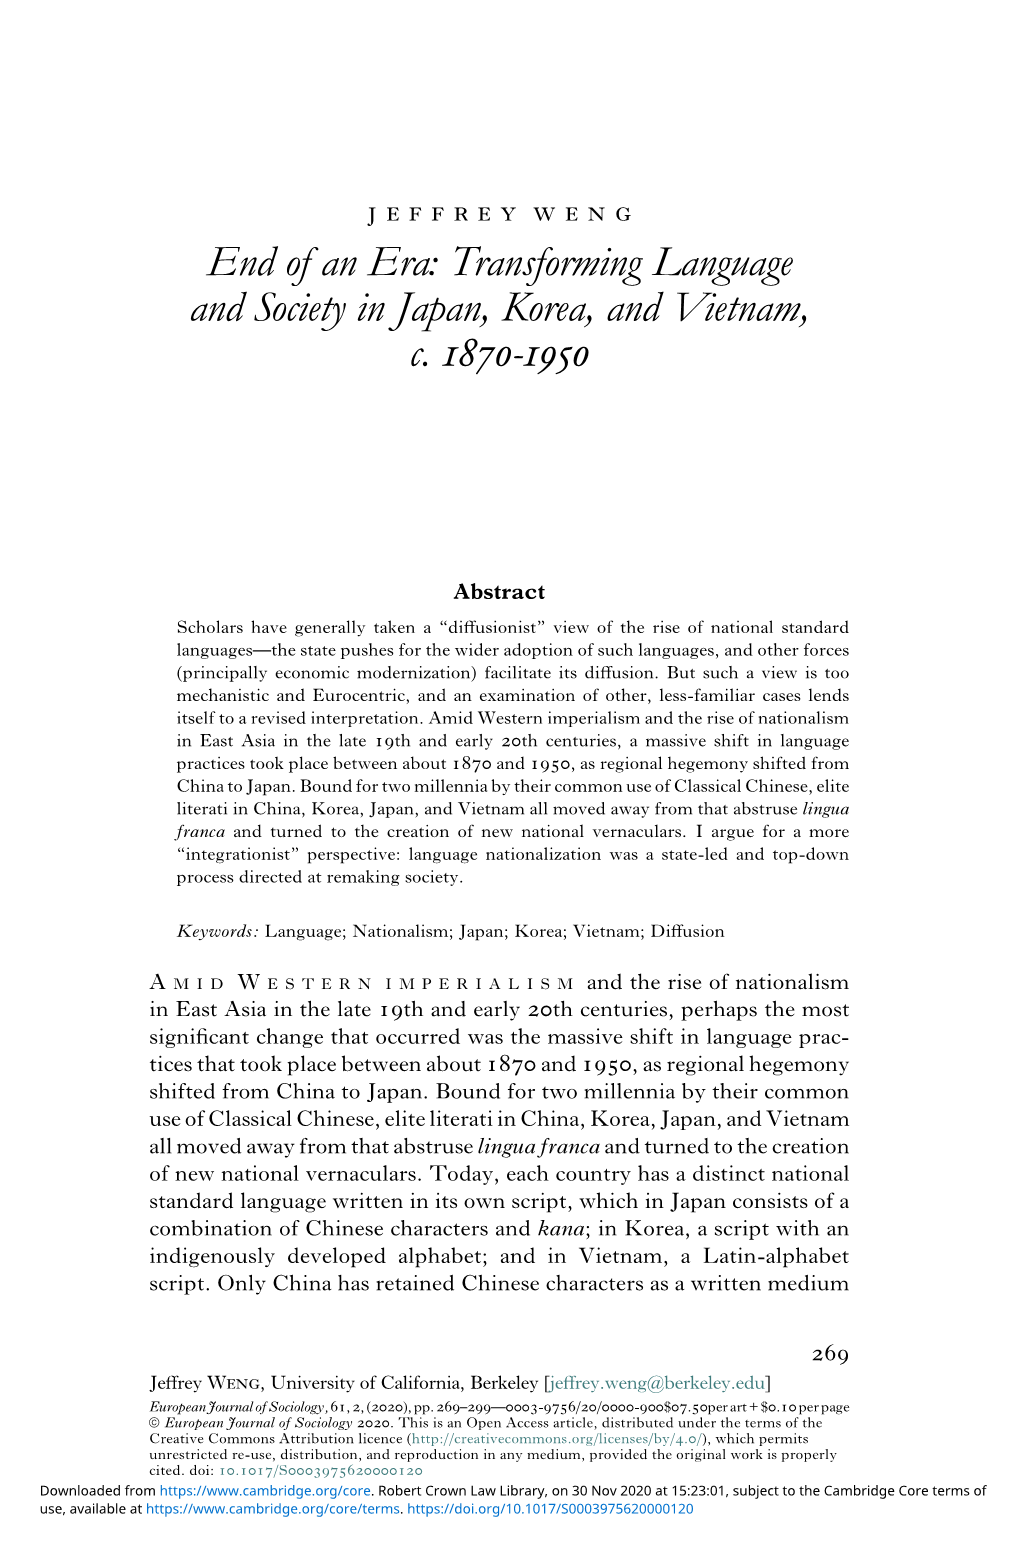 End of an Era: Transforming Language and Society in Japan, Korea, and Vietnam, C